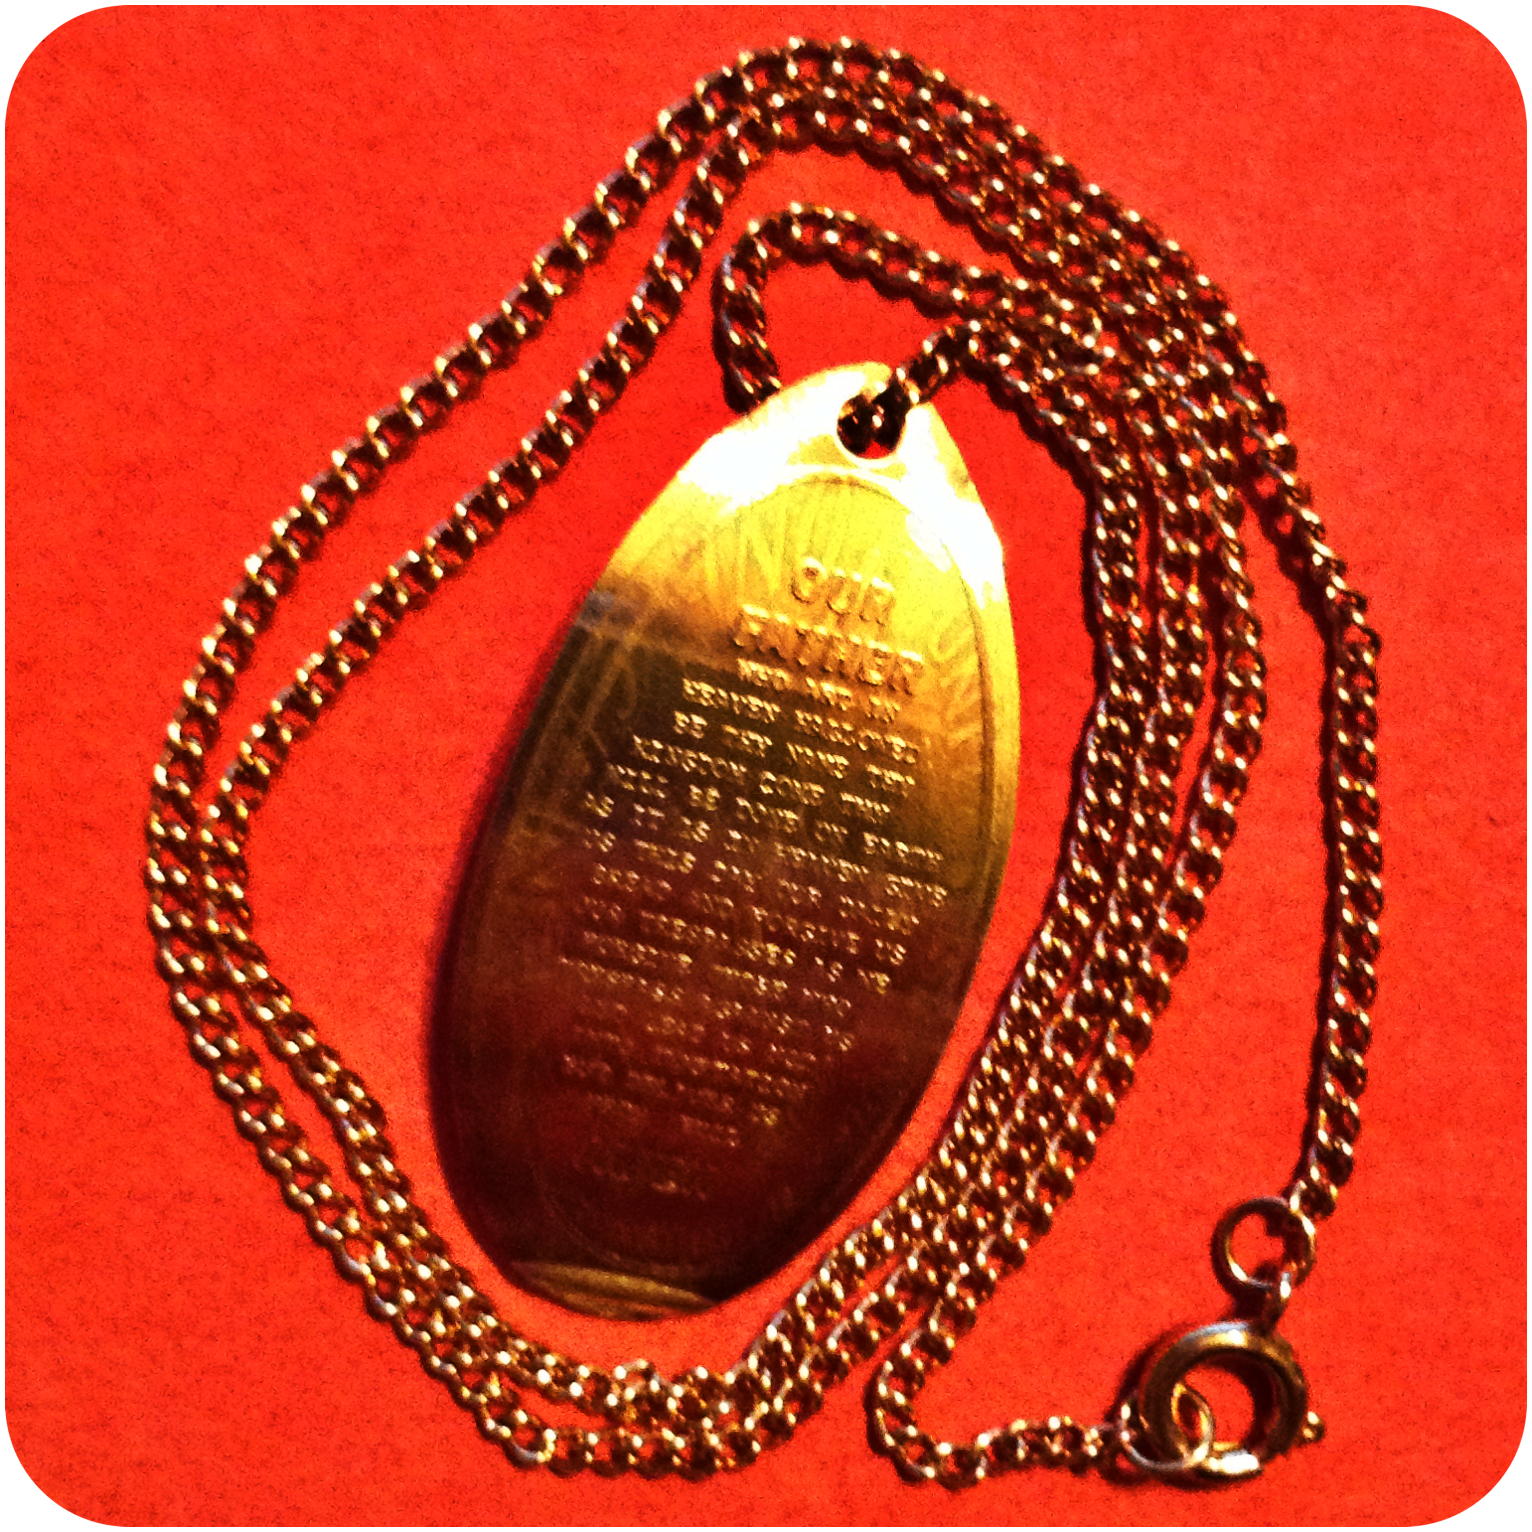 Entire Lords Prayer in Wire Border Elongated Pressed Copper Penny Charm Necklace